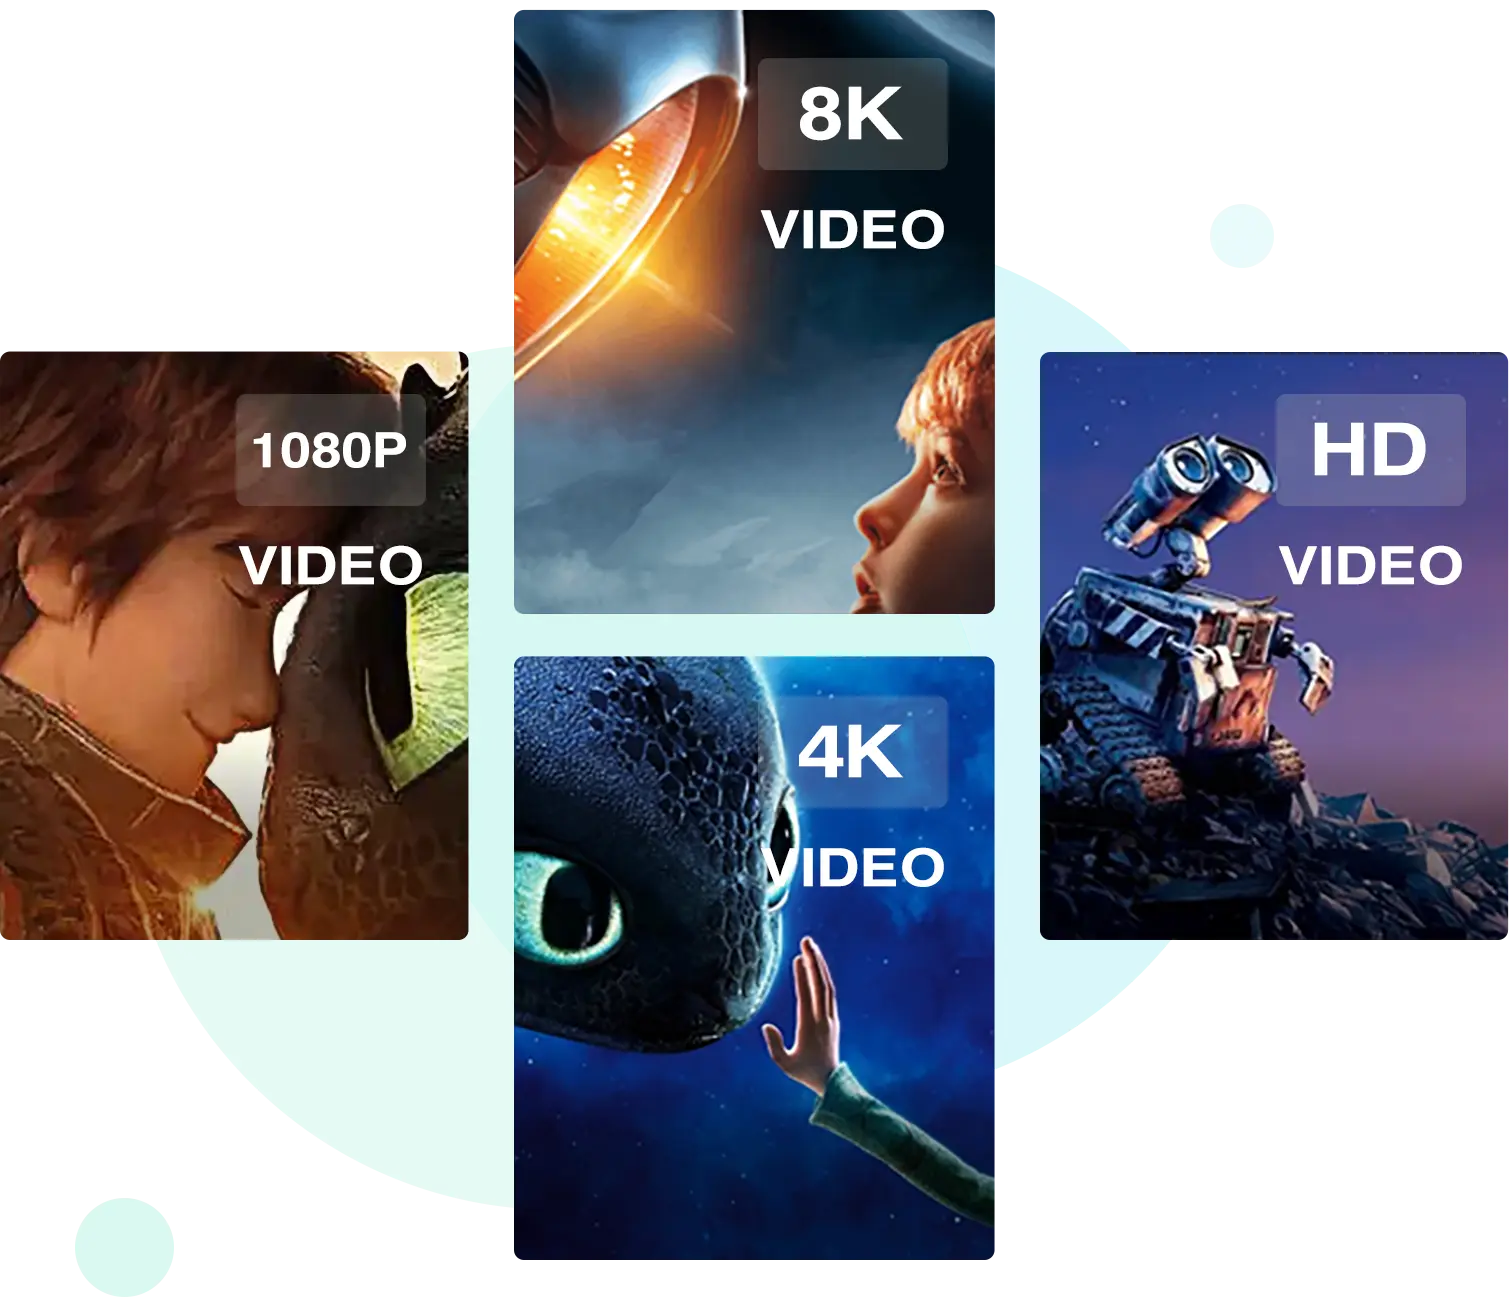 download videos in HD 720p, HD 1080p, 4K, and 8K resolution